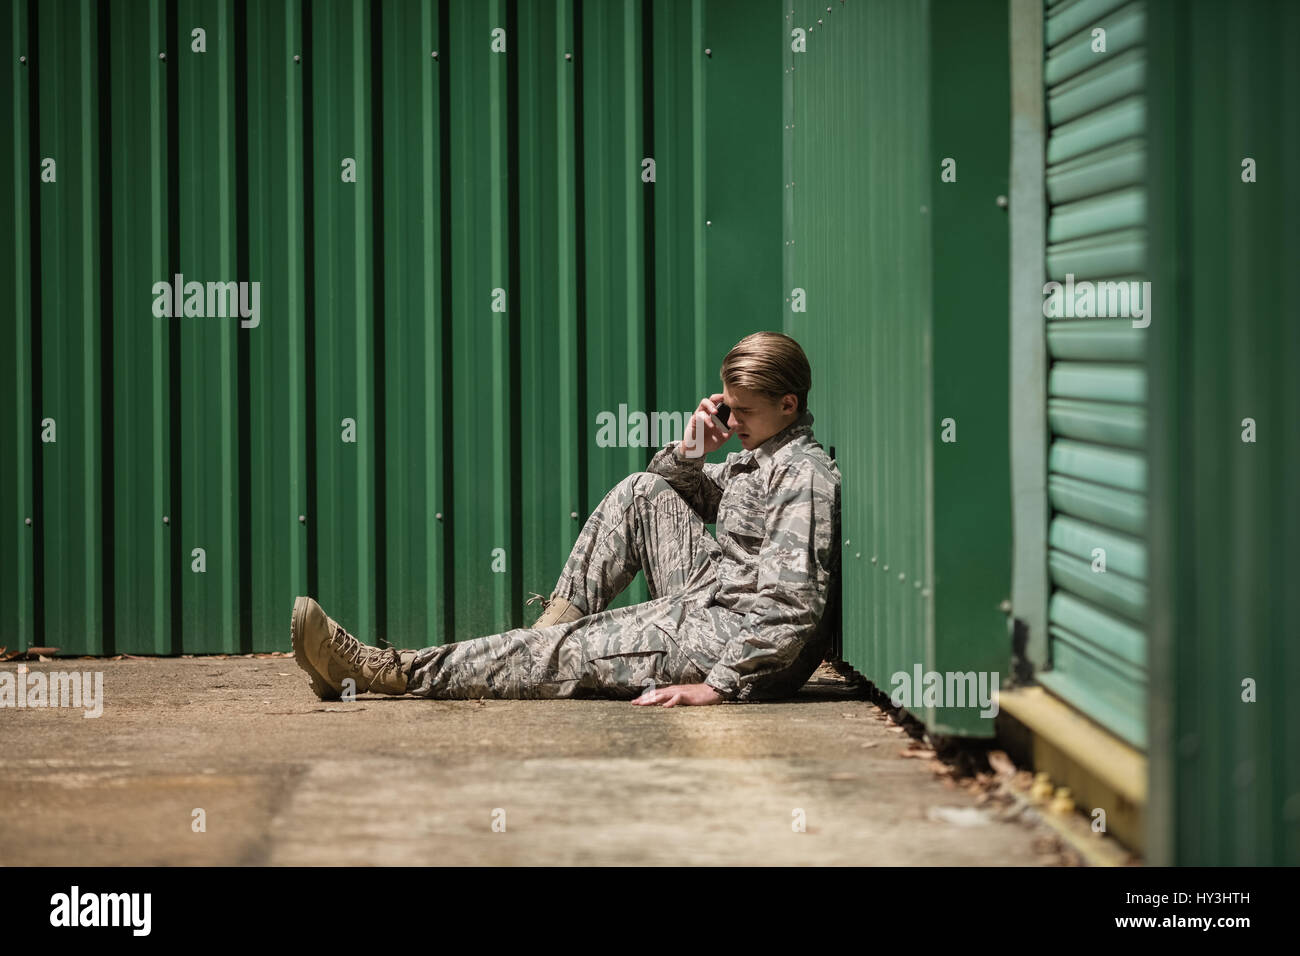 Military soldier talking on mobile phone in boot camp Stock Photo